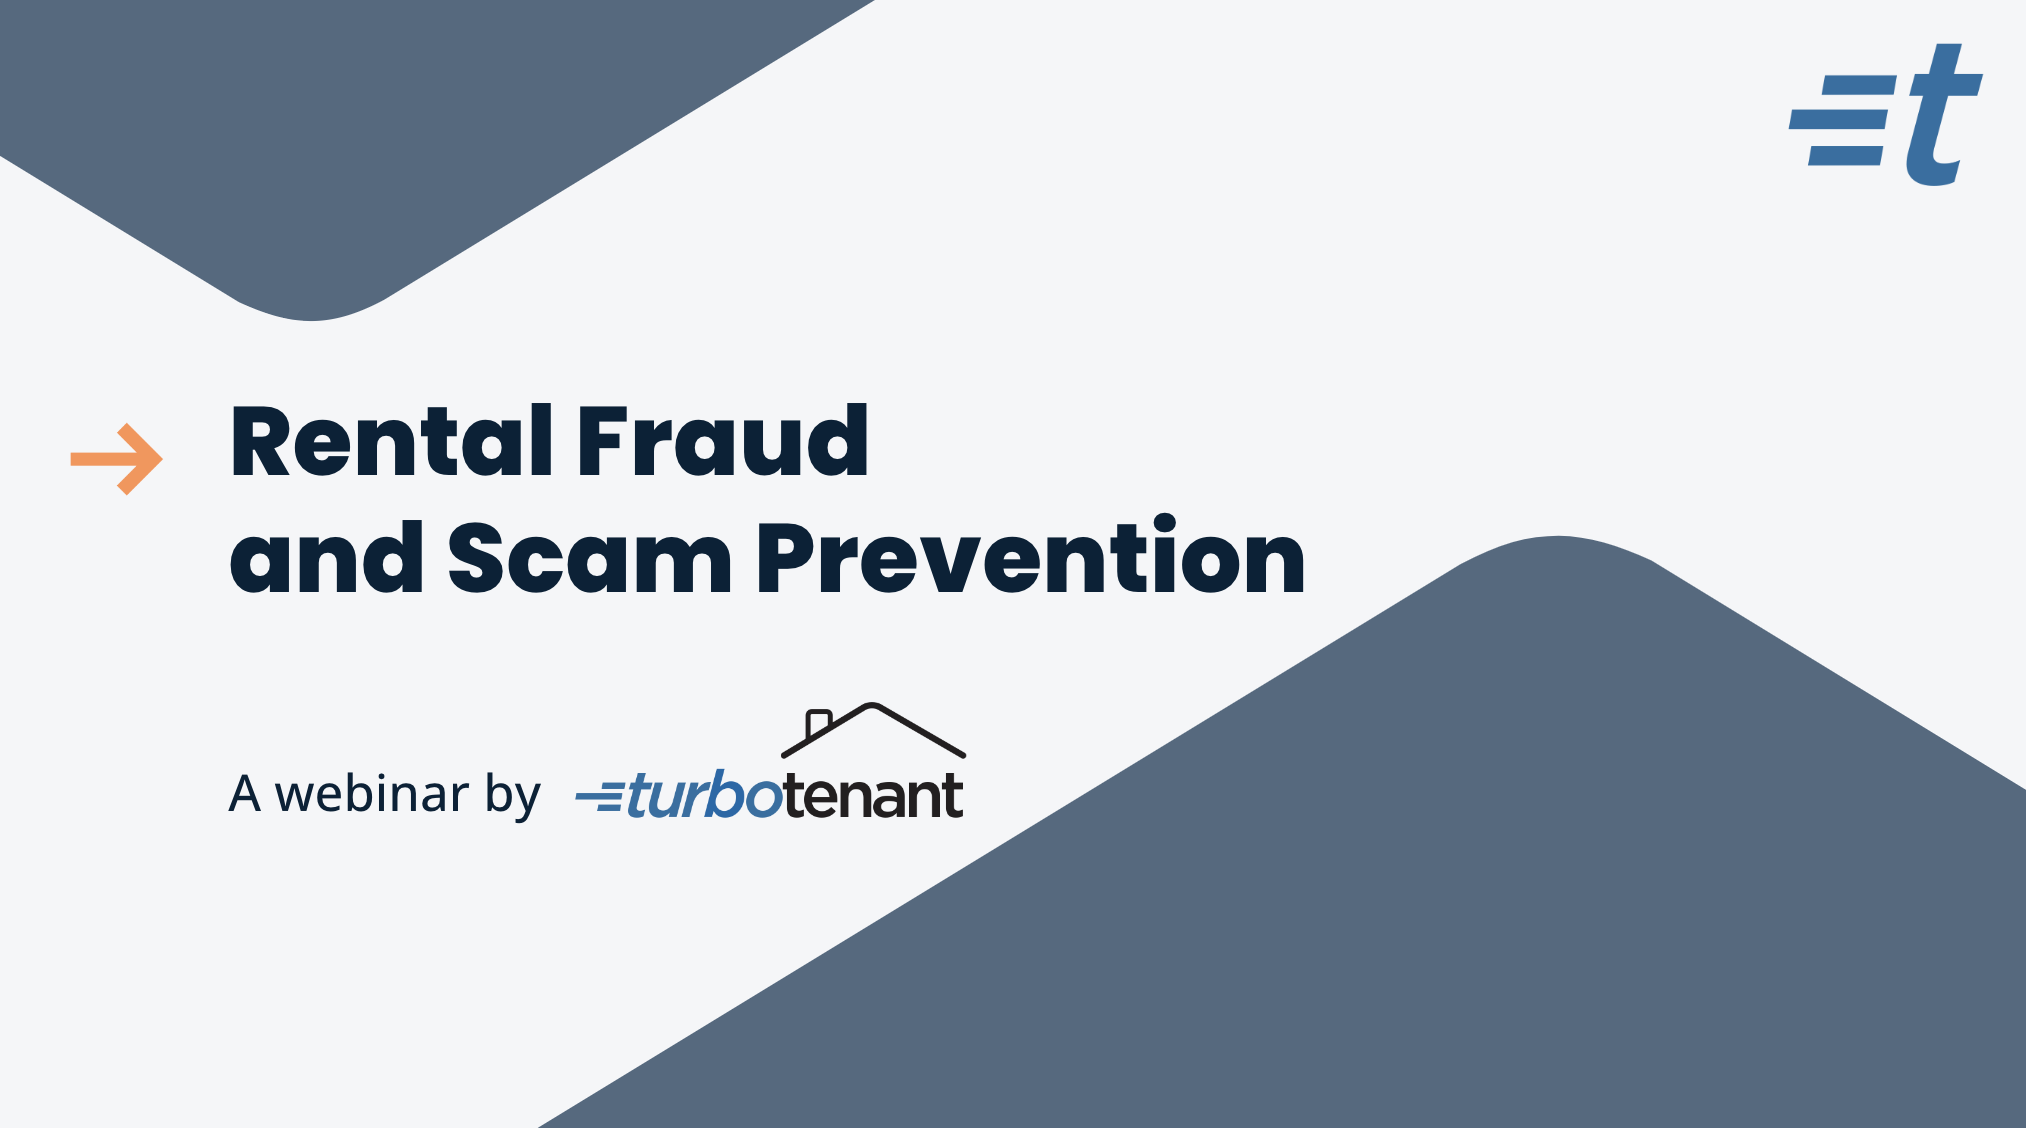 Rental Fraud and Scam Prevention